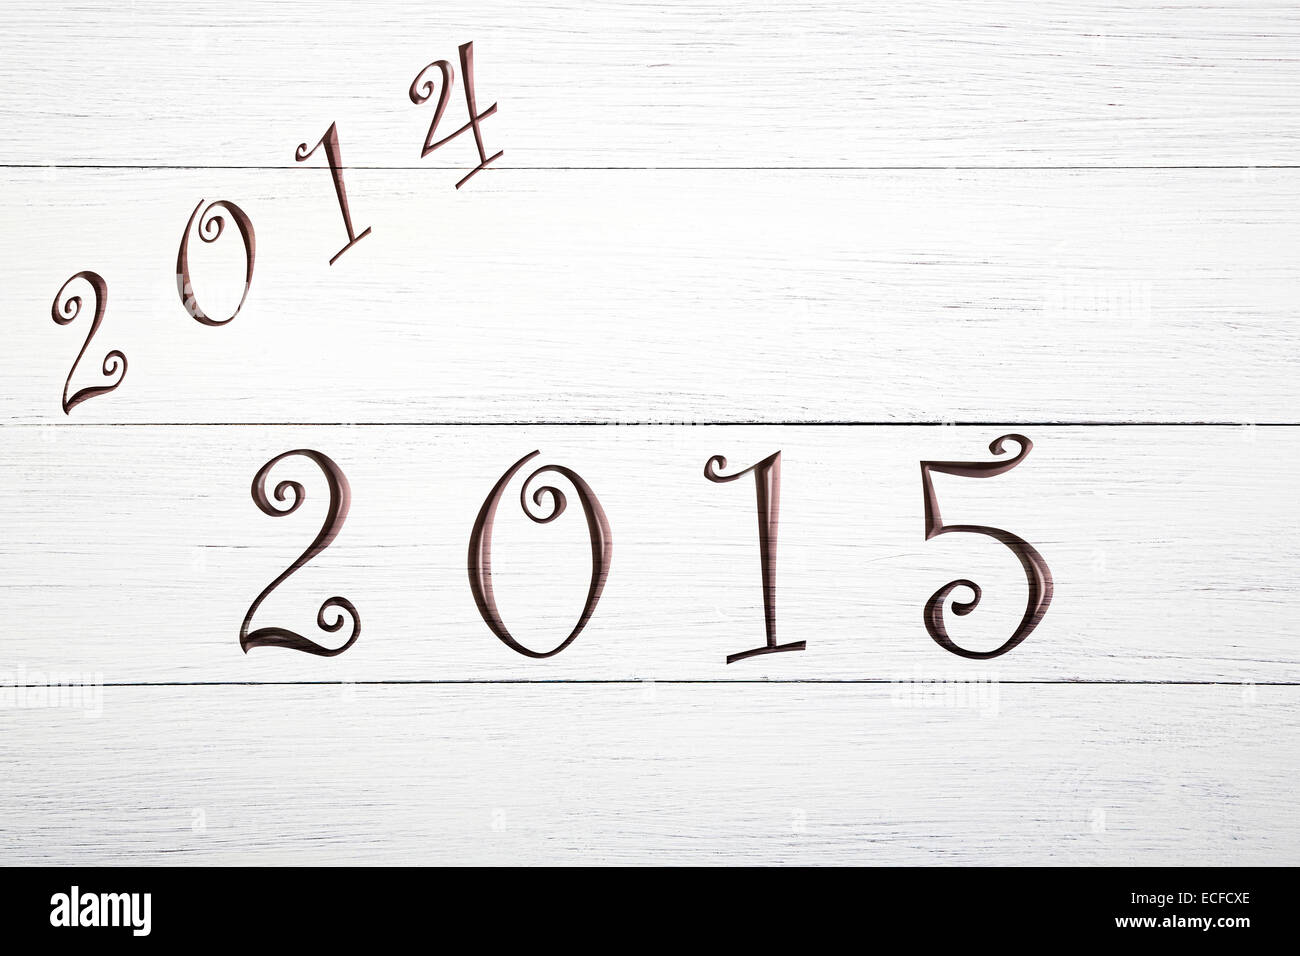 New year 2015, on a wooden background Stock Photo